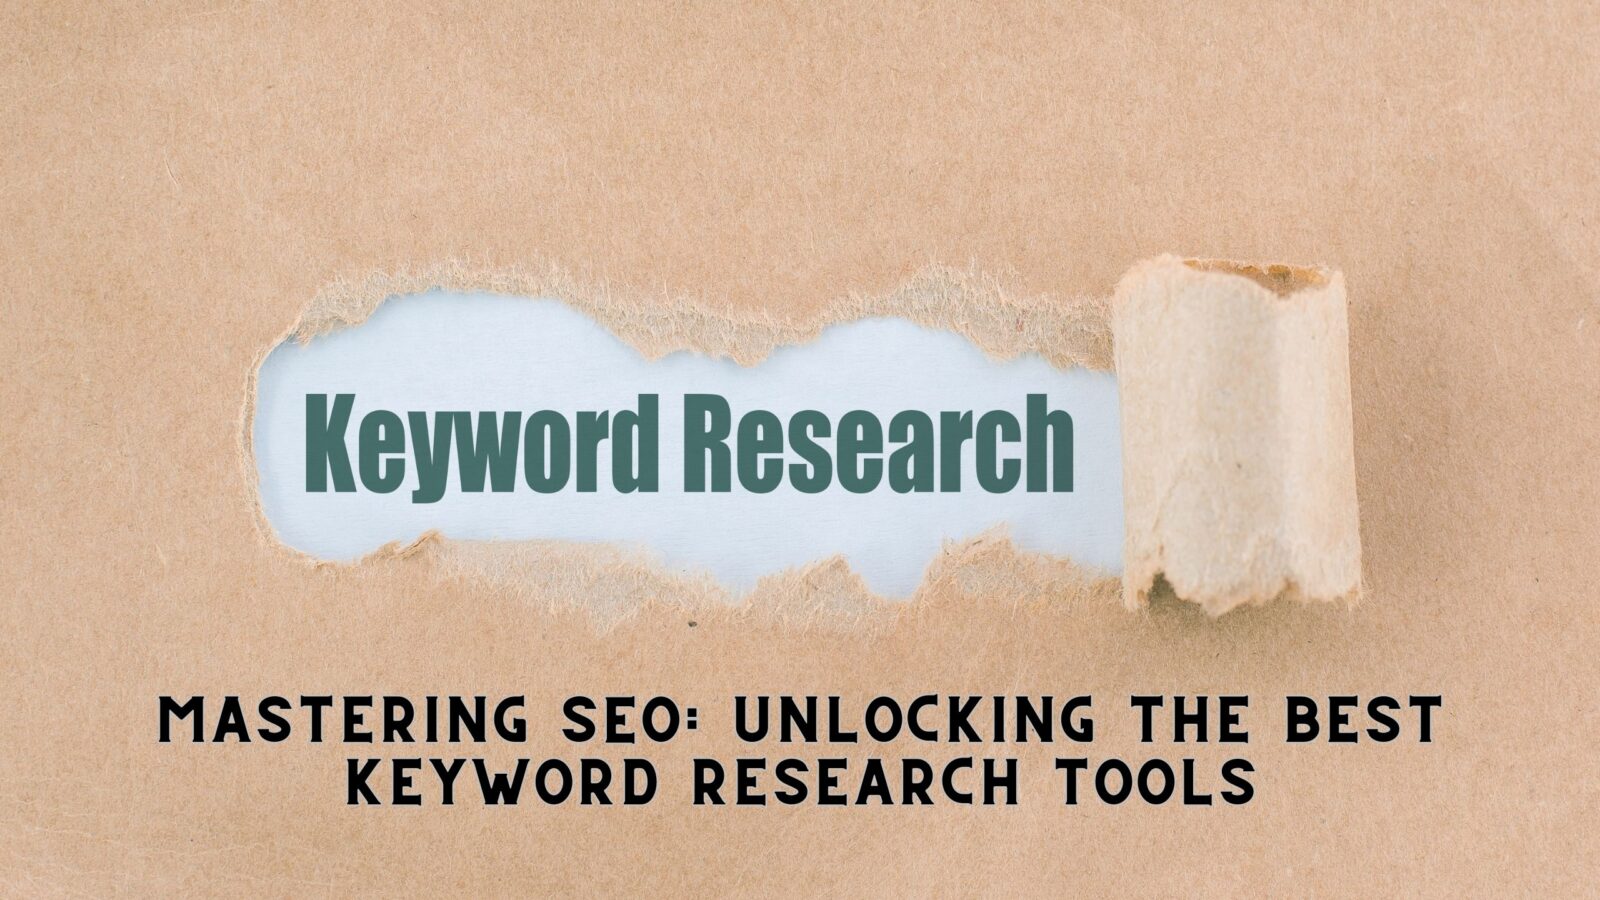 Mastering SEO: Unlocking the Best Keyword Research Tools